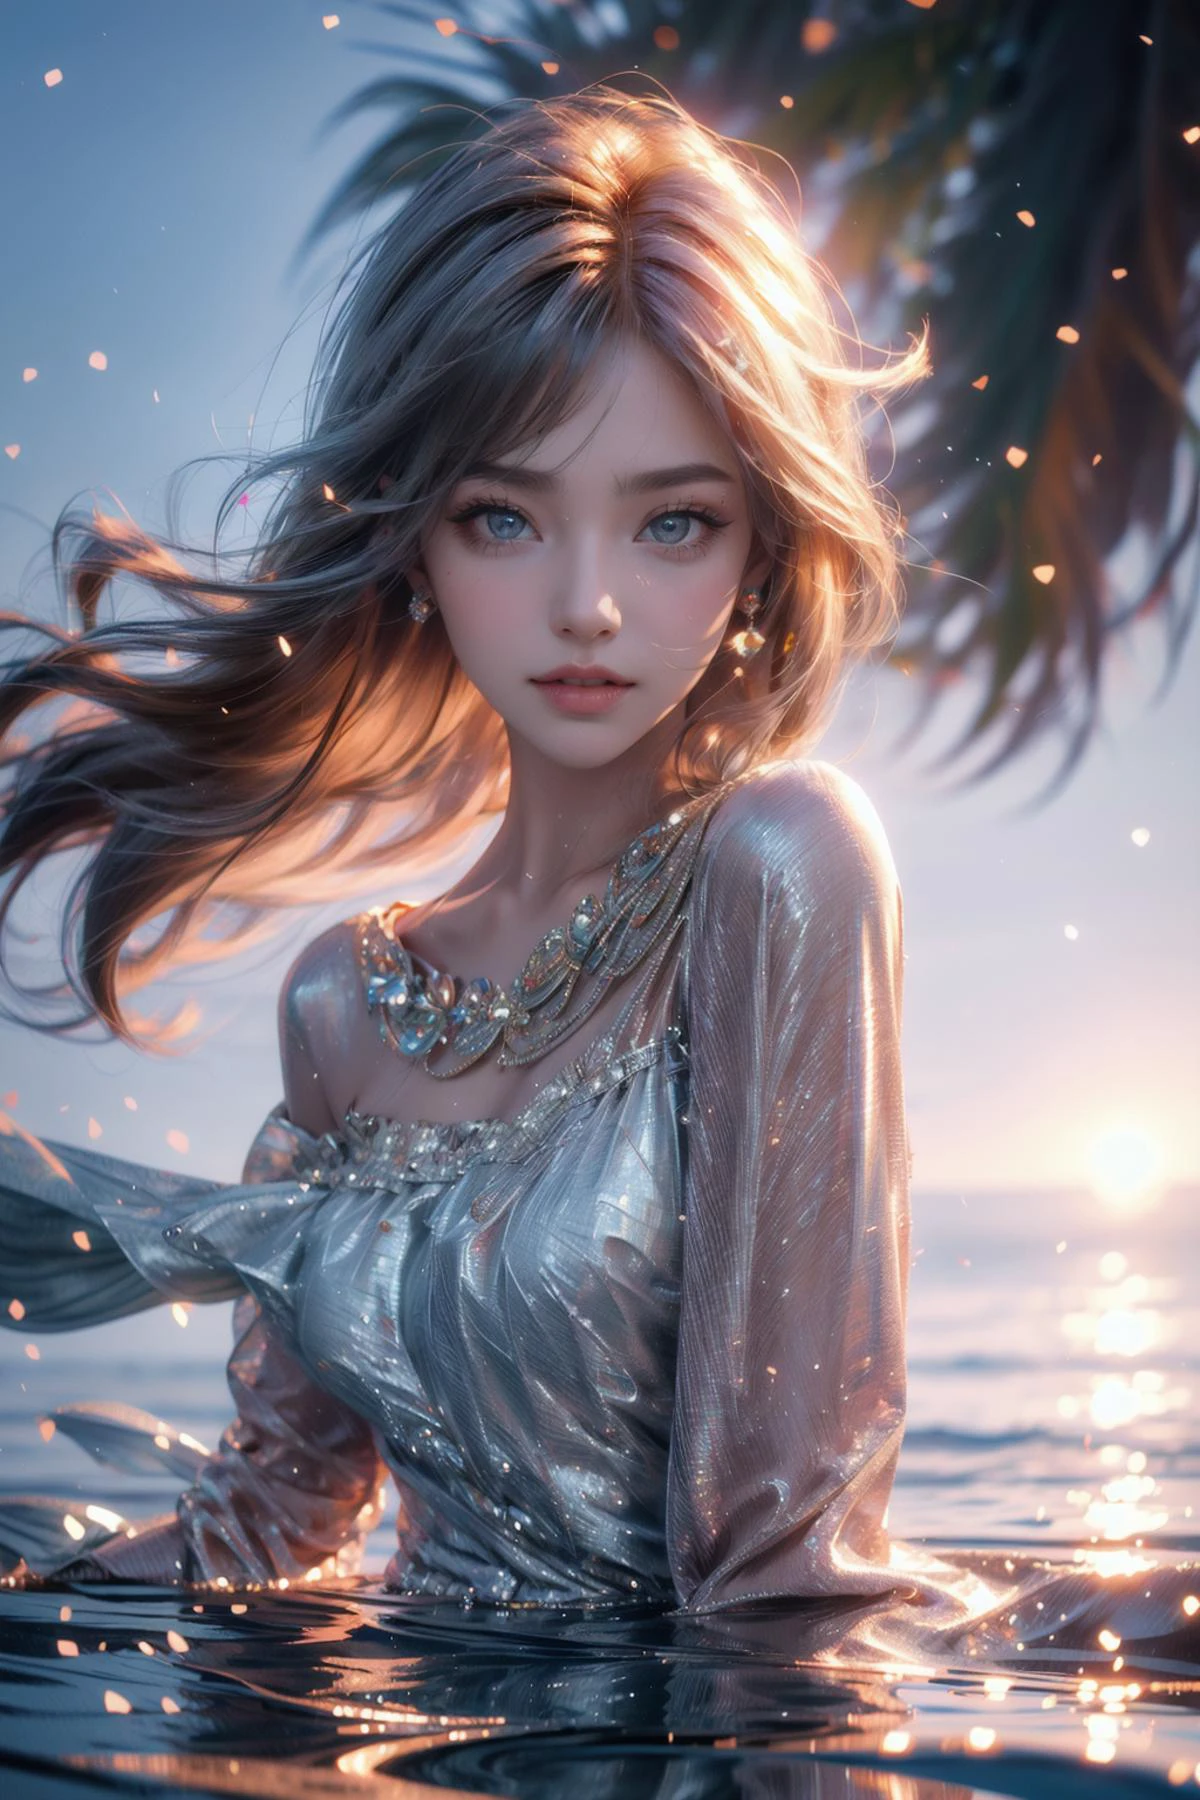 (masterpiece, best quality, highest quality, beautiful and aesthetic) ,(1 girl, smile, looking at viewer, metallic hair, breasts:1),(fabulous feminine makeup, blushed, long eyelashes, double eyelid), (portrait, focus face), (body in water:1.2, sea), (white dress, thin dress, shoulder-baring, deep cleavage), (light on face, beautiful light, sun light, sunset:1.2, sparkling water surface, backlit:1.2, dof:1),